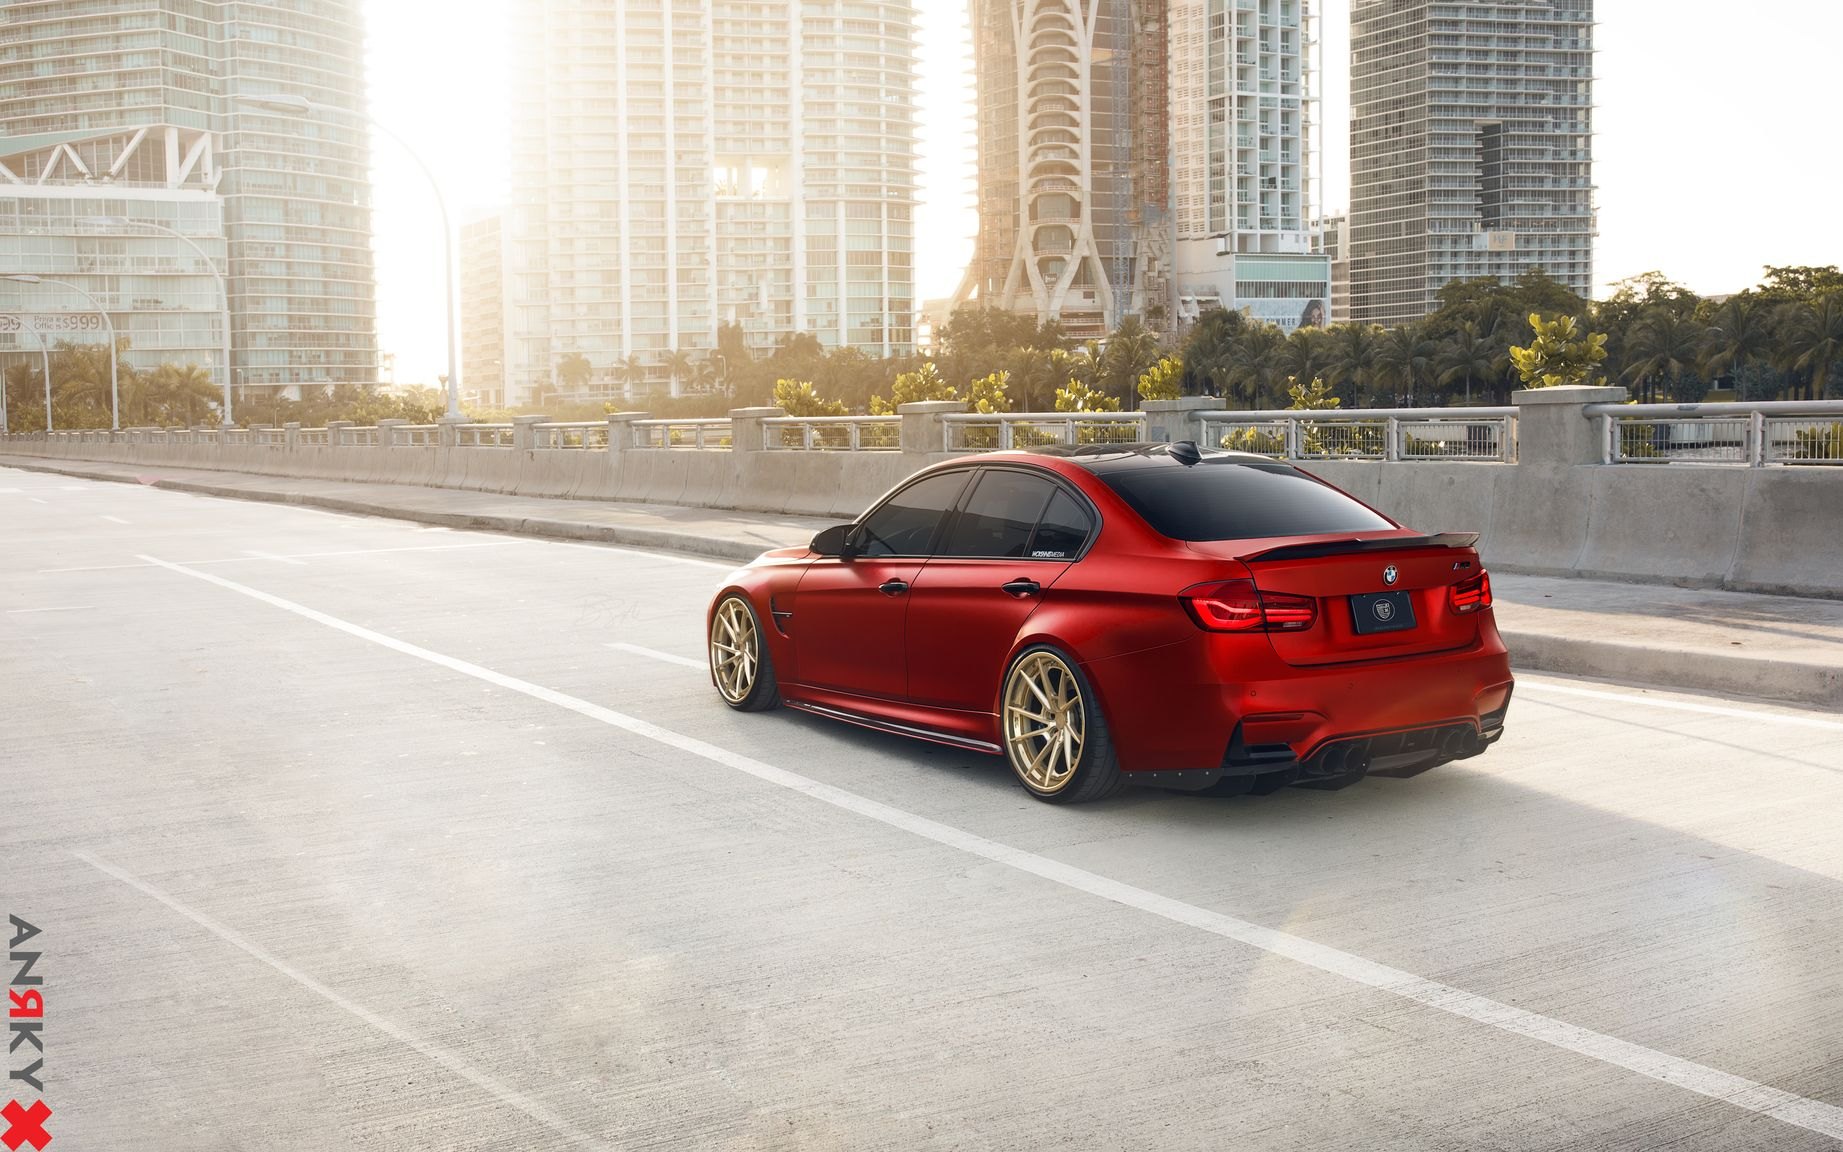 Custom Style Rear Spoiler on Red BMW 3-Series - Photo by Anrky Wheels